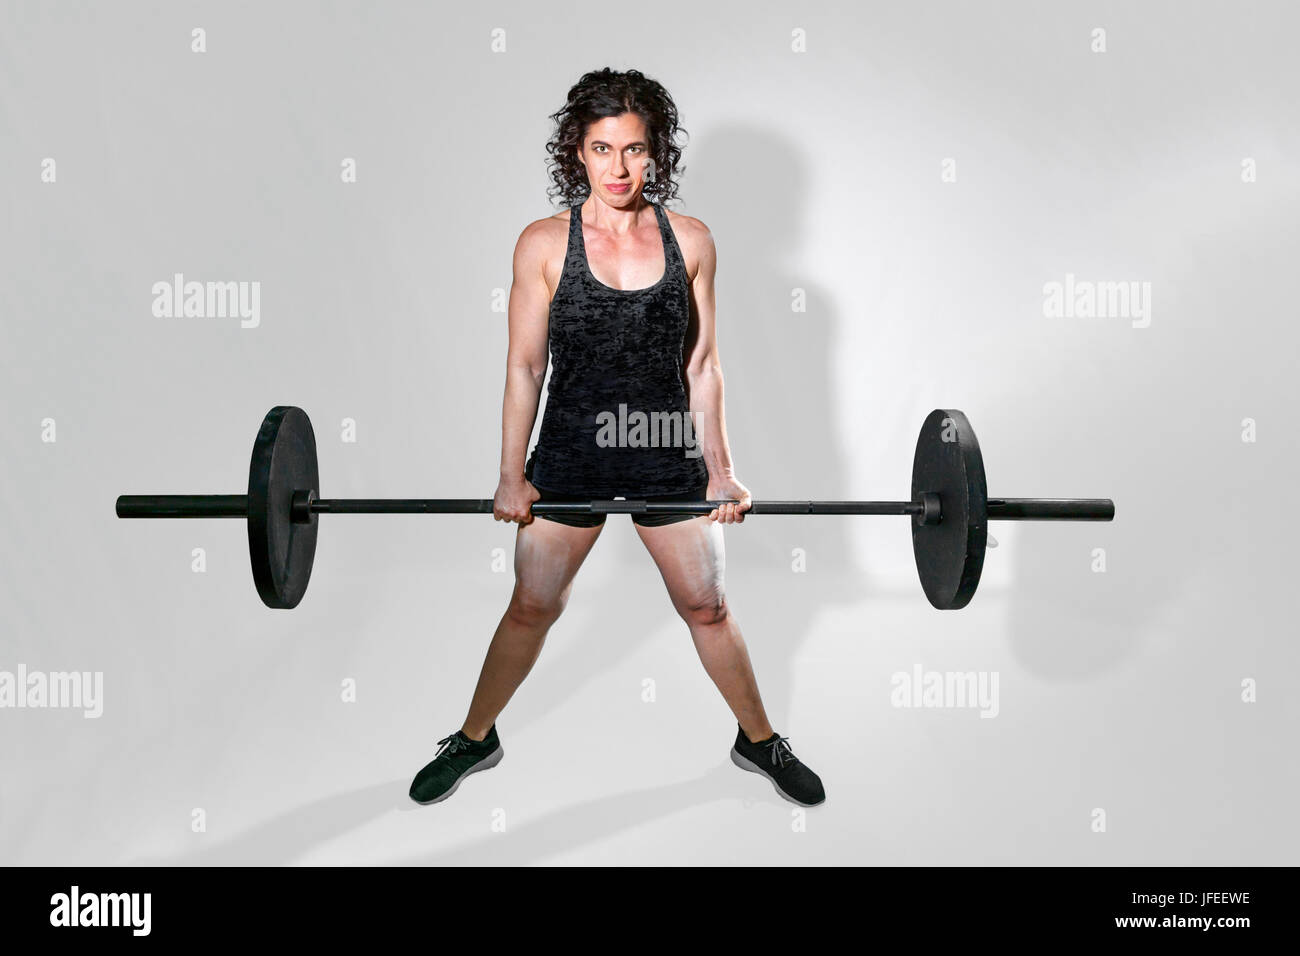 Tough, female weightlifter holds a barbell in a dead lift with an intense glare for the camera. There is a path around the woman. Stock Photo